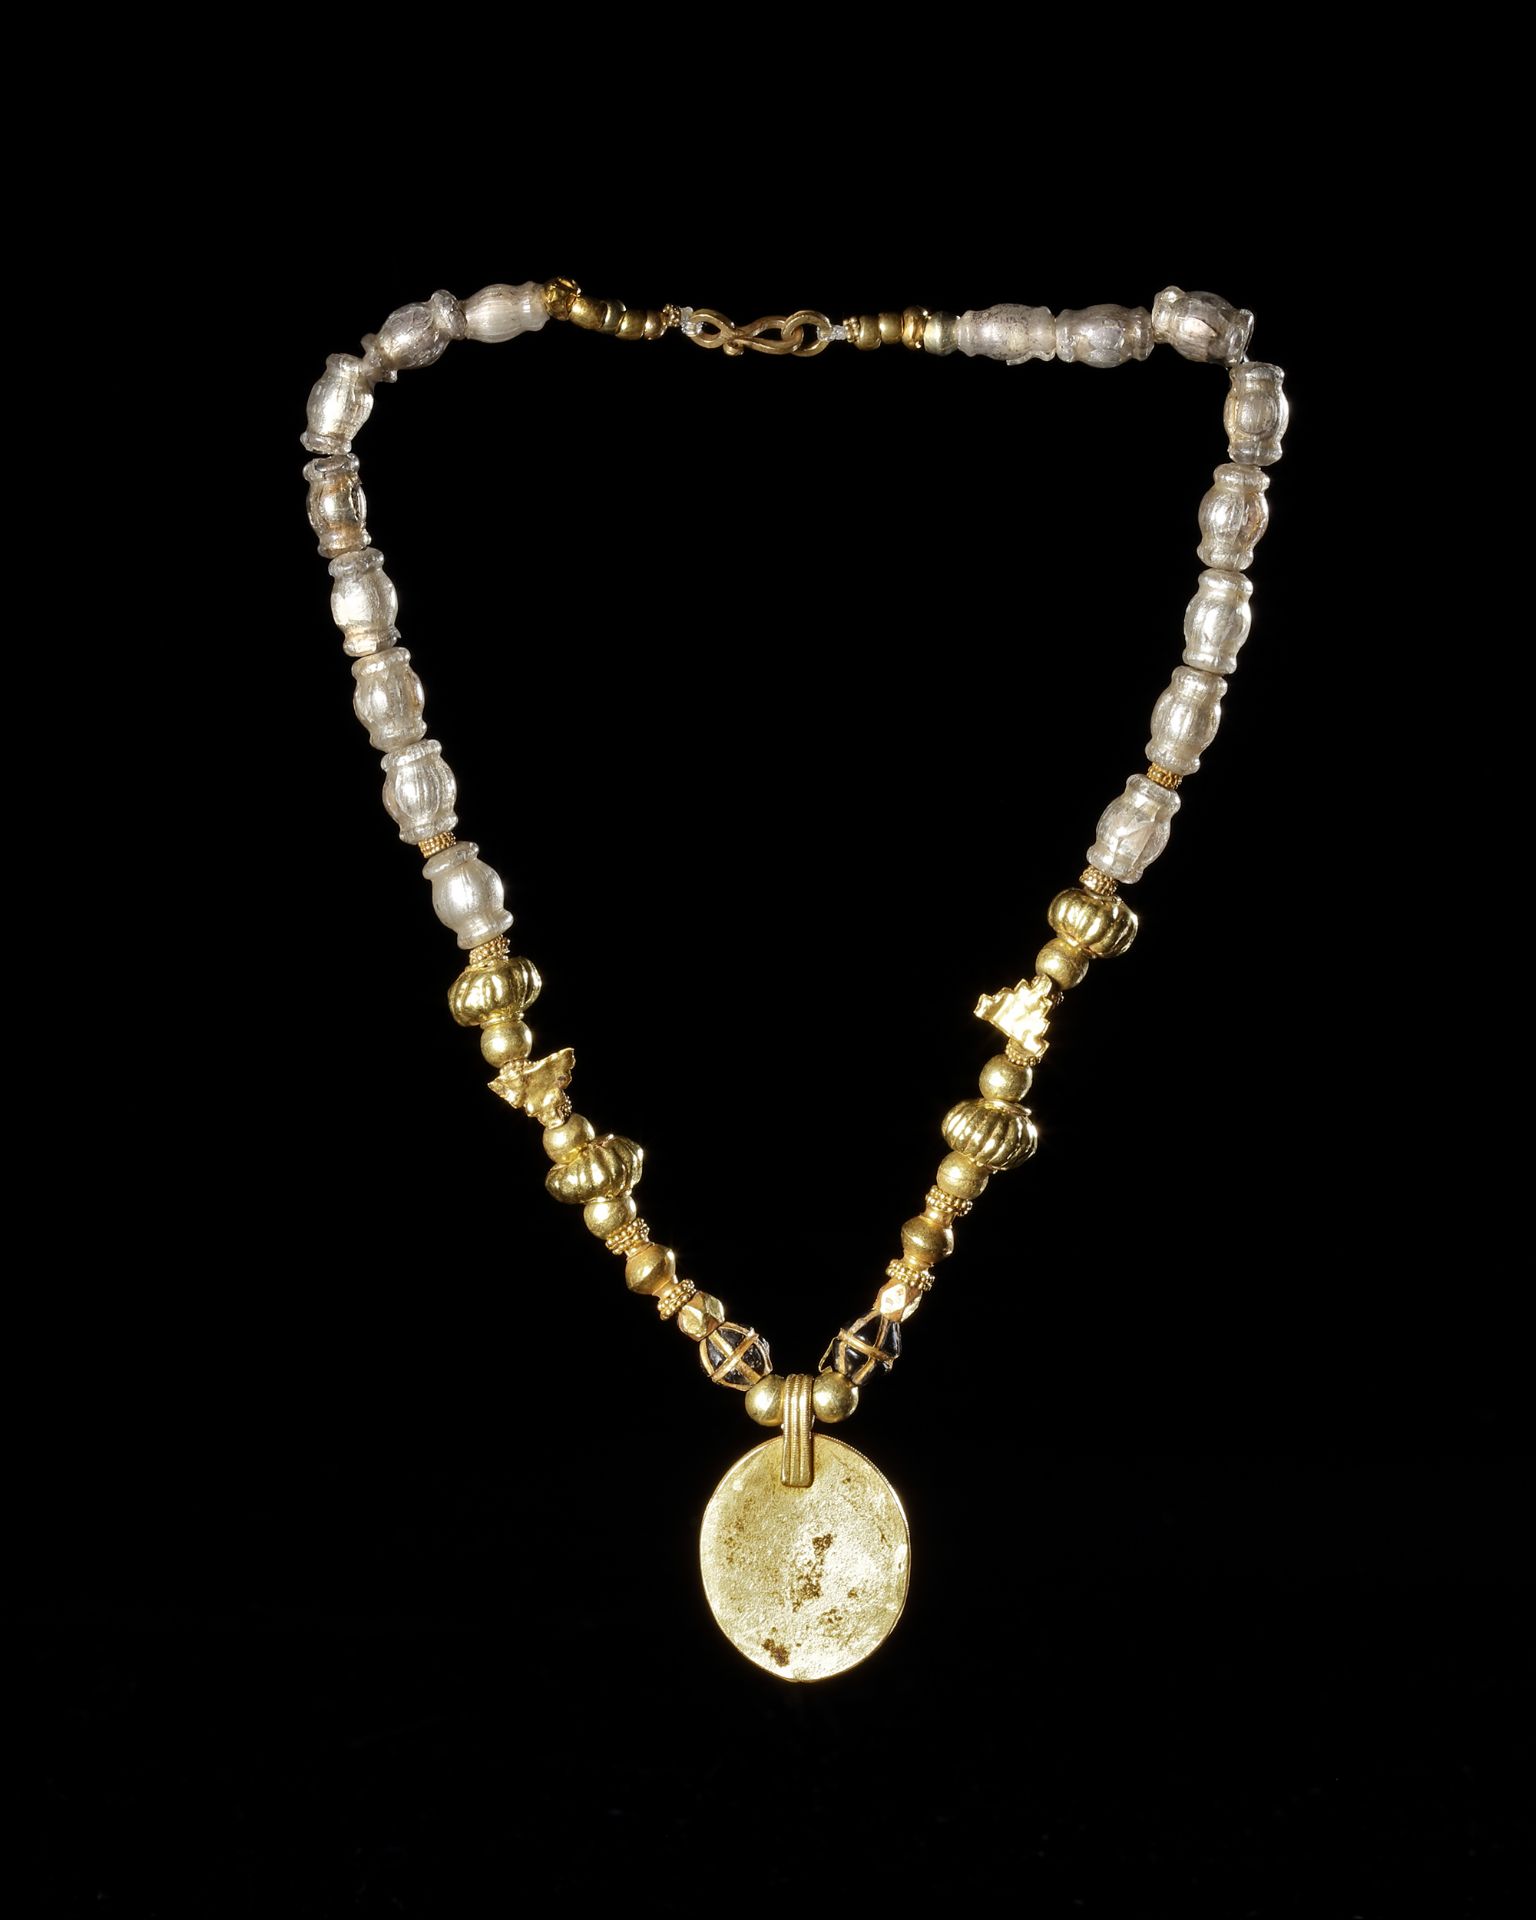 A NECKLACE WITH A CAMEO PENDANT AND NECKLACE OF ANCIENT BEADS OF VARIOUS PERIODS, 3RD CENTURY BC TO - Image 2 of 3